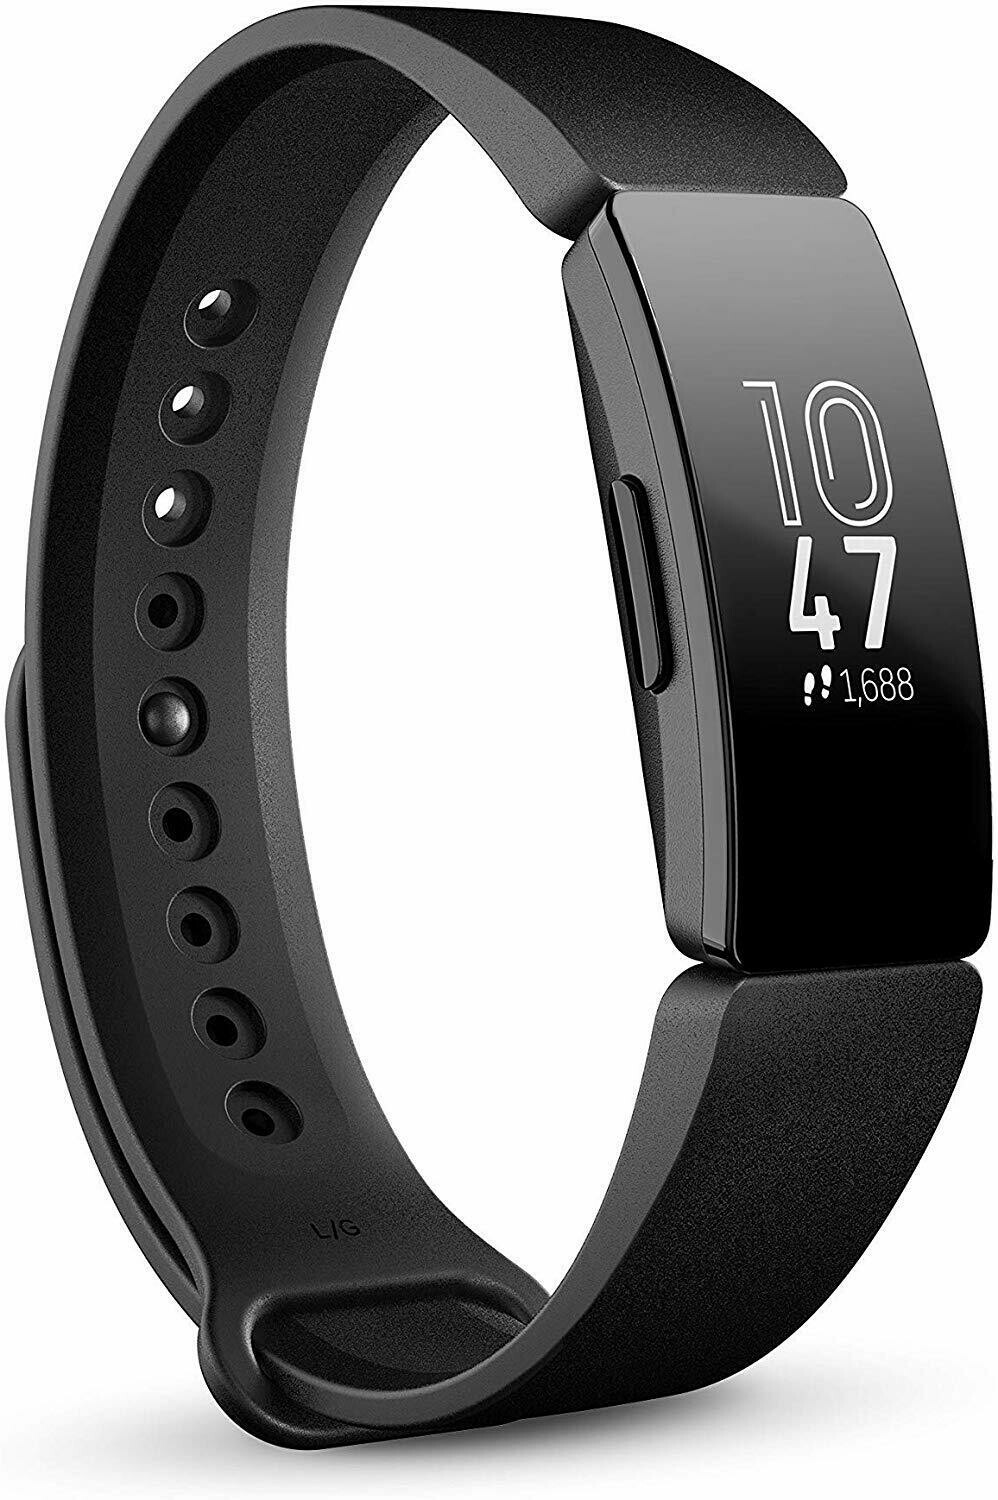 Fitbit Inspire Health and Fitness Tracker (Black)